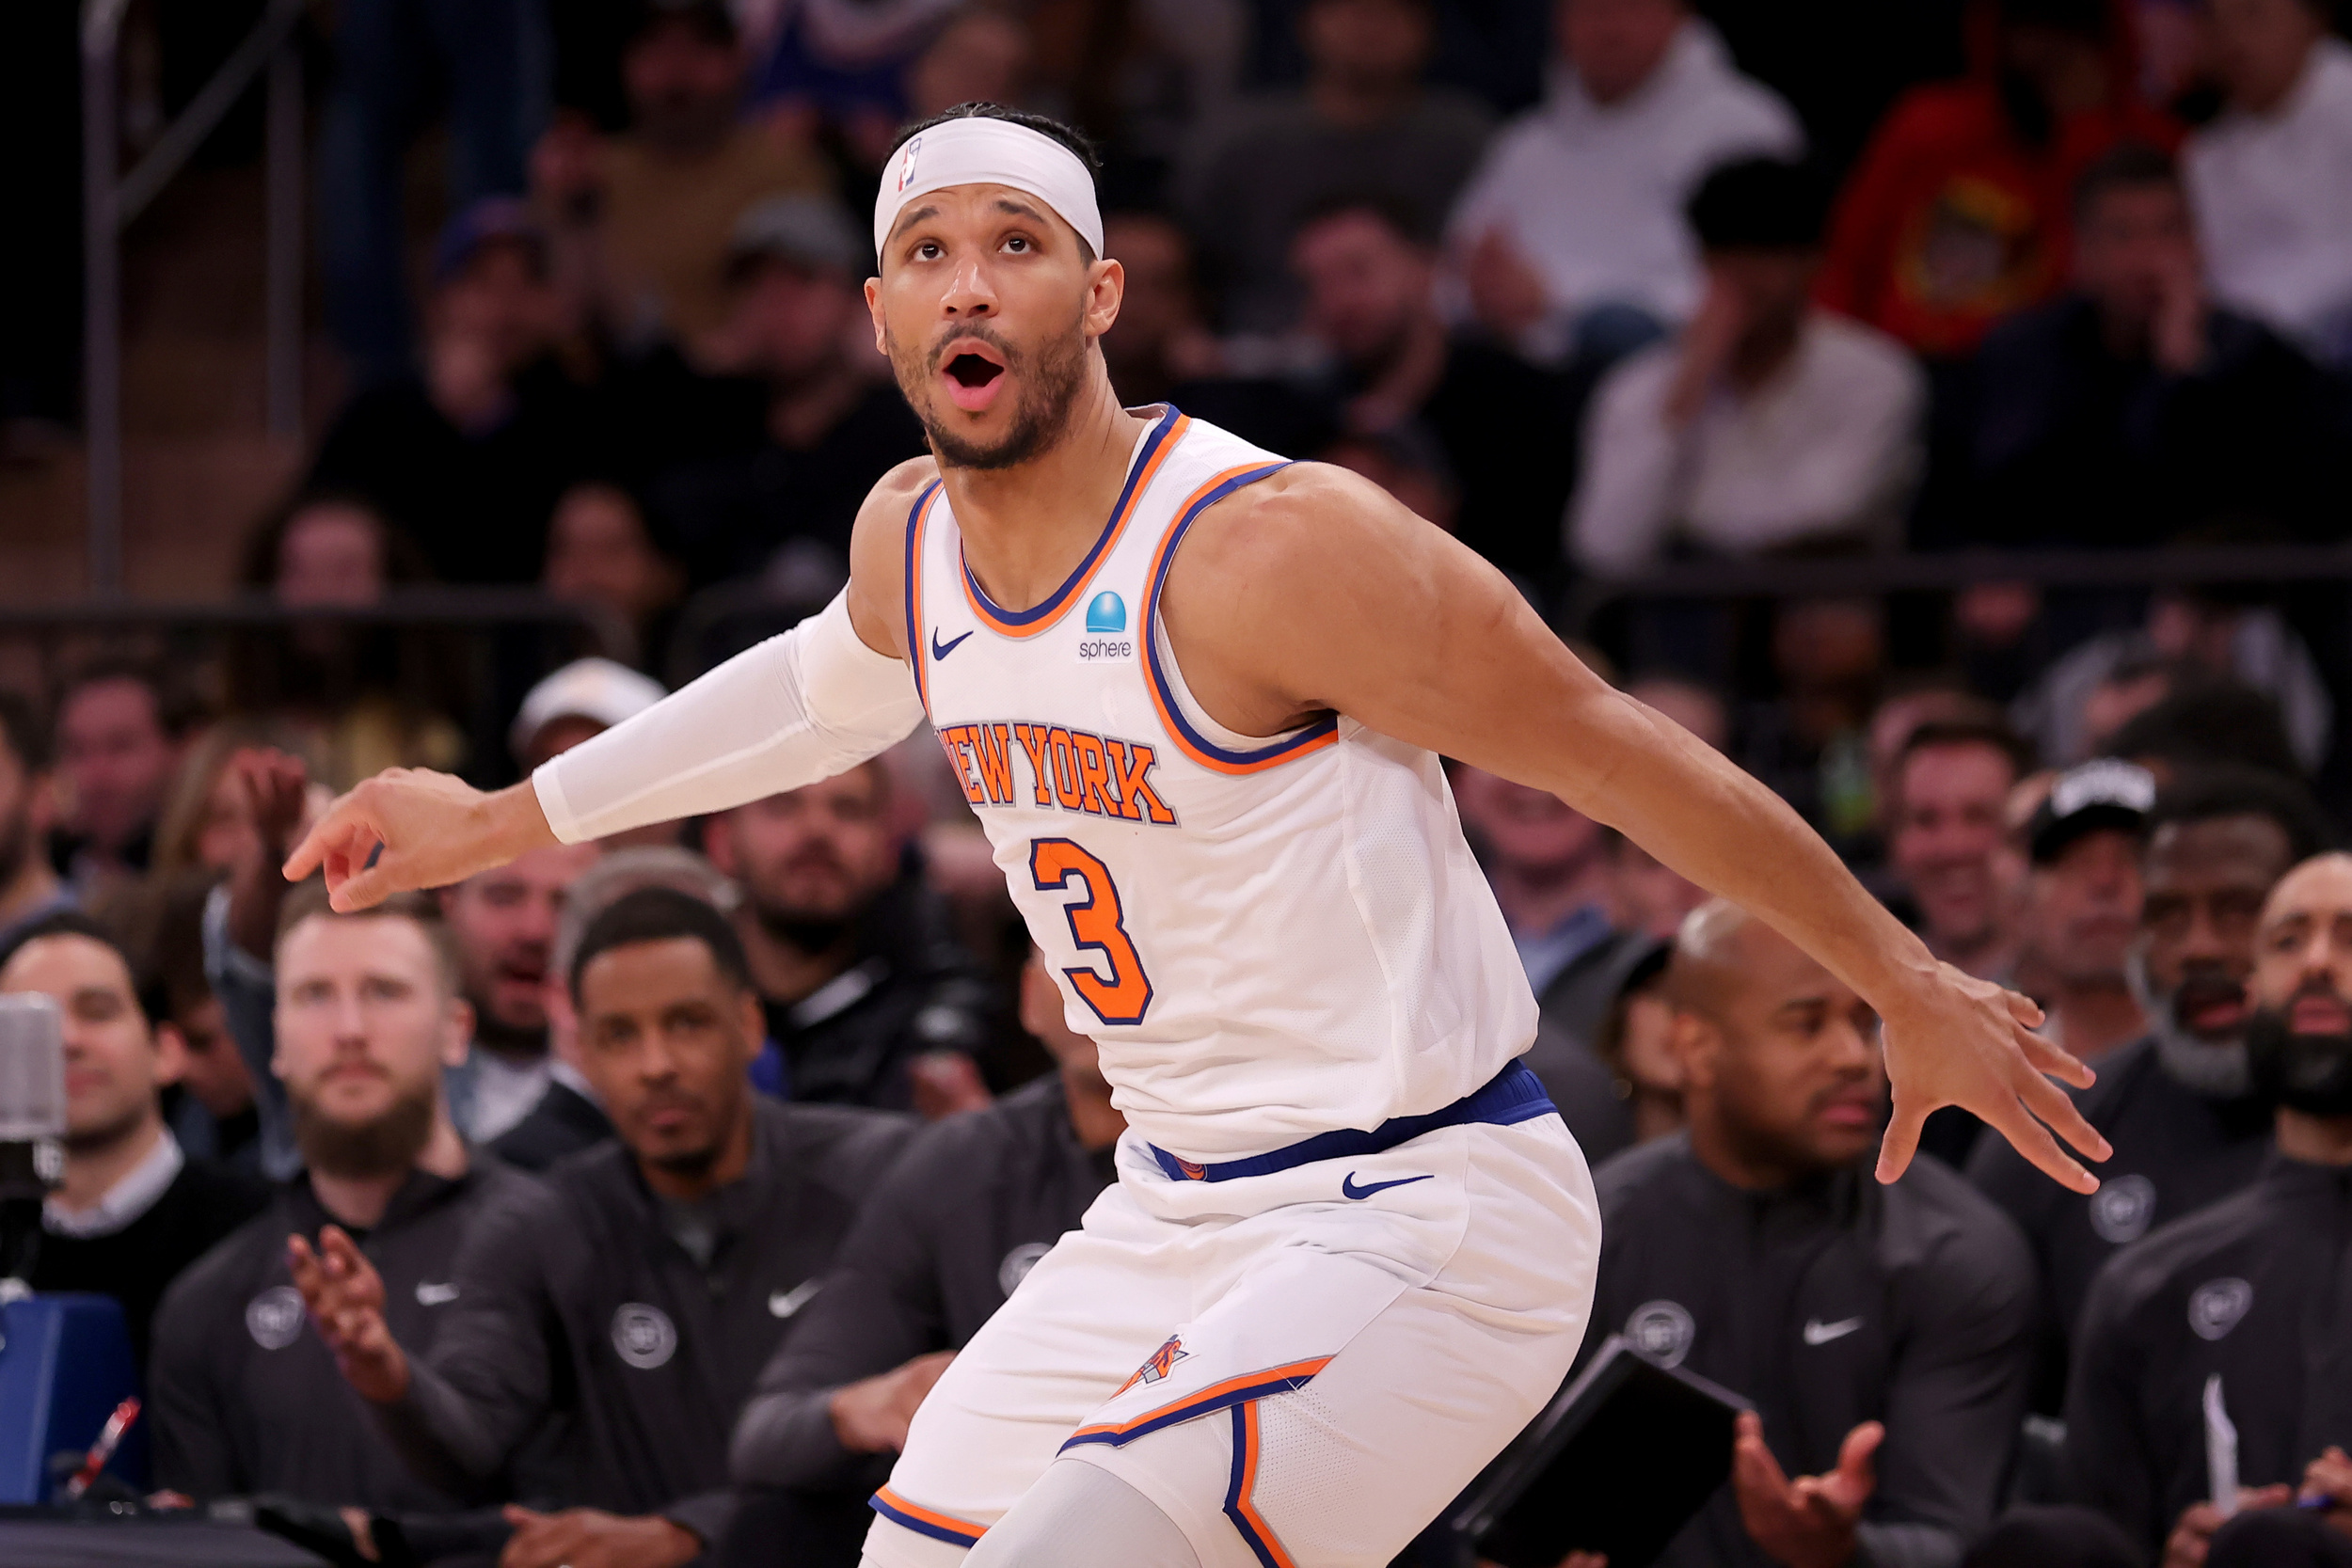 knicks' josh hart expected sixers to 'disrespect' him